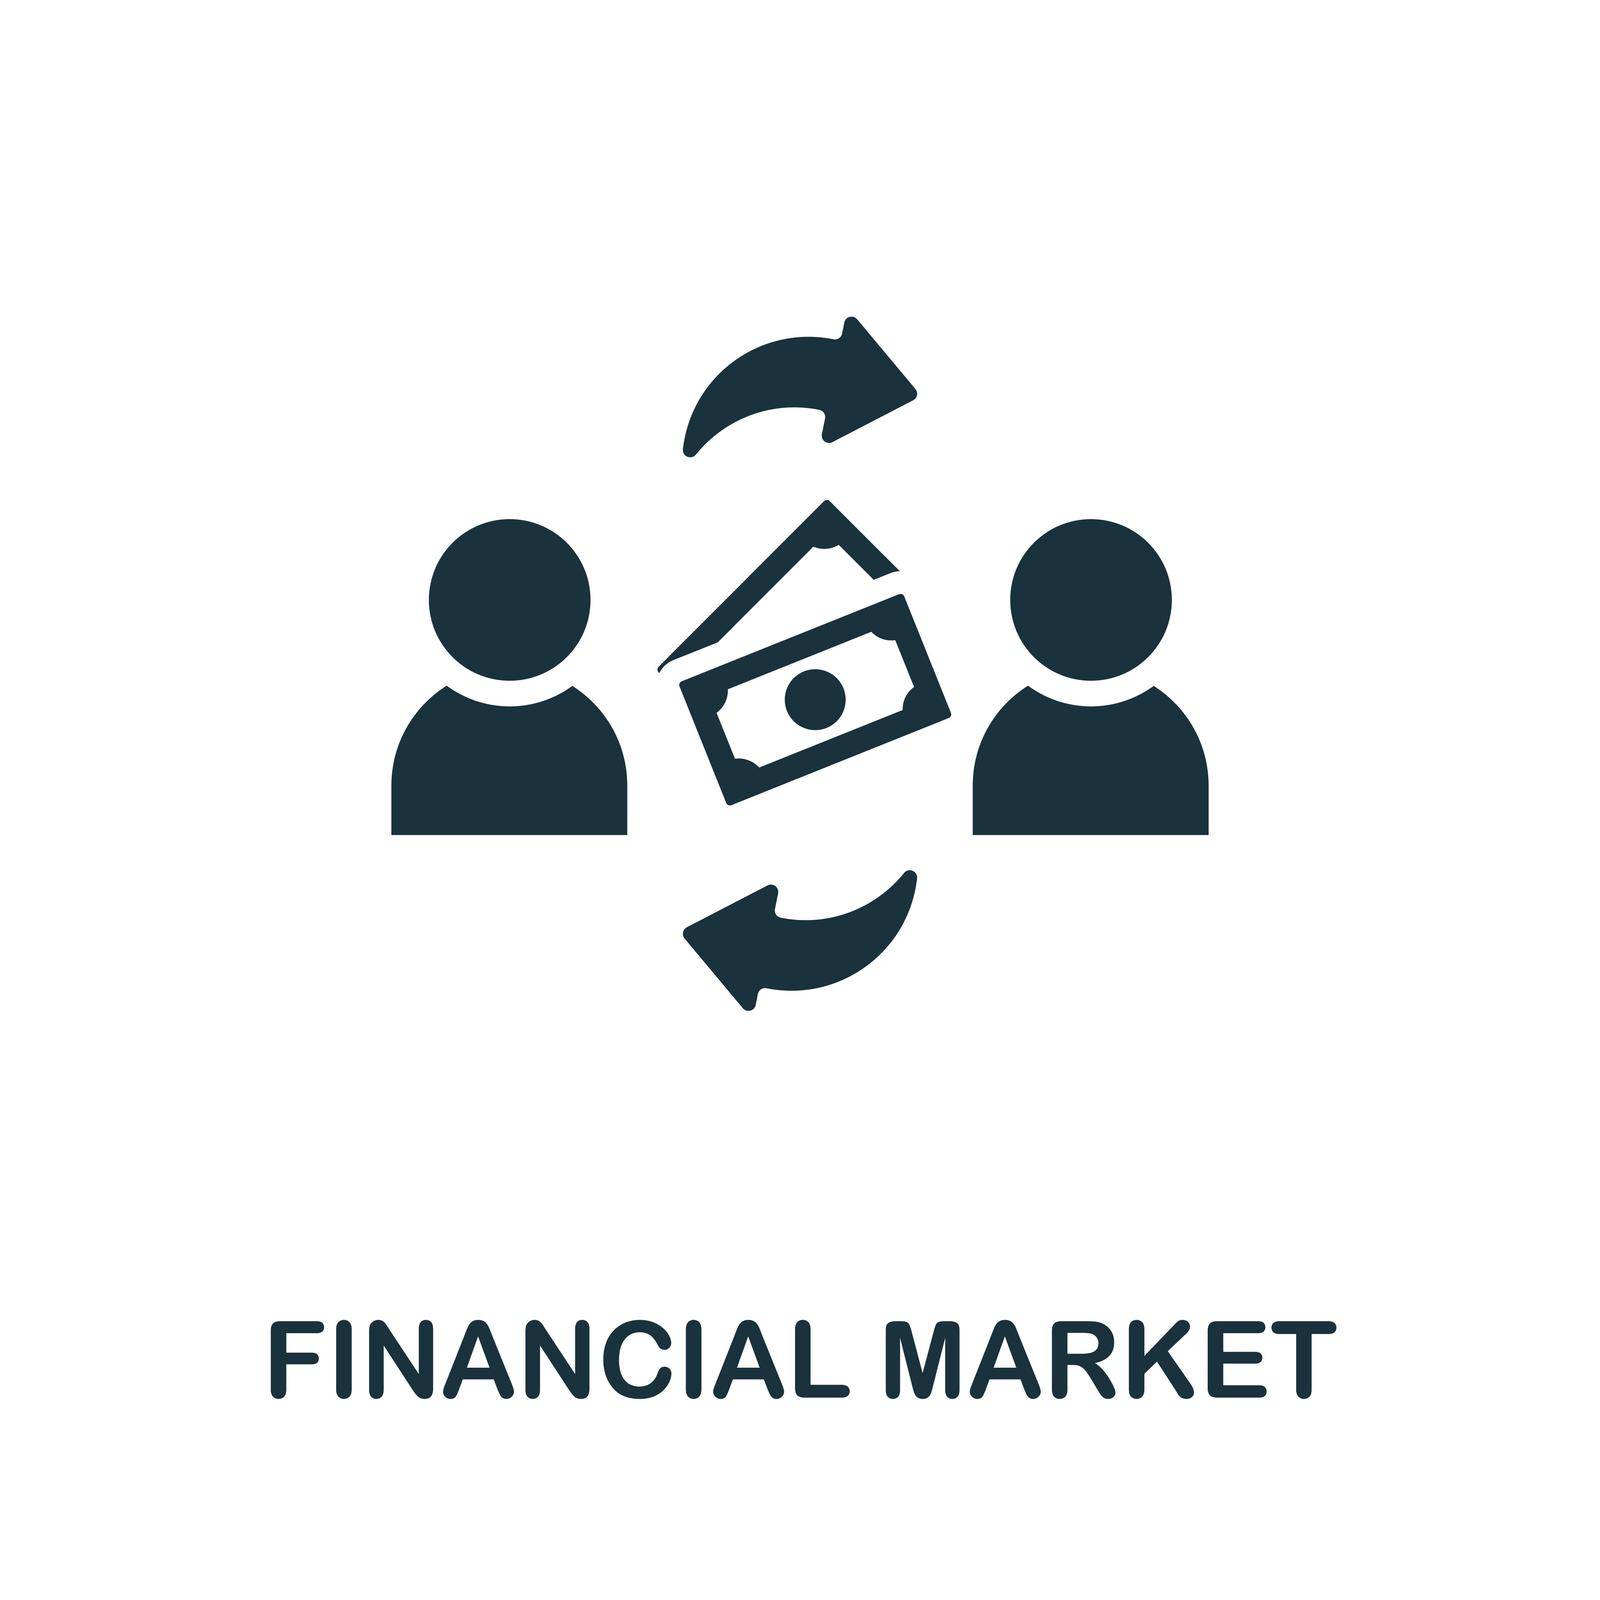 Financial Market icon. Monochrome sign from market economy collection. Creative Financial Market icon illustration for web design, infographics and more by simakovavector